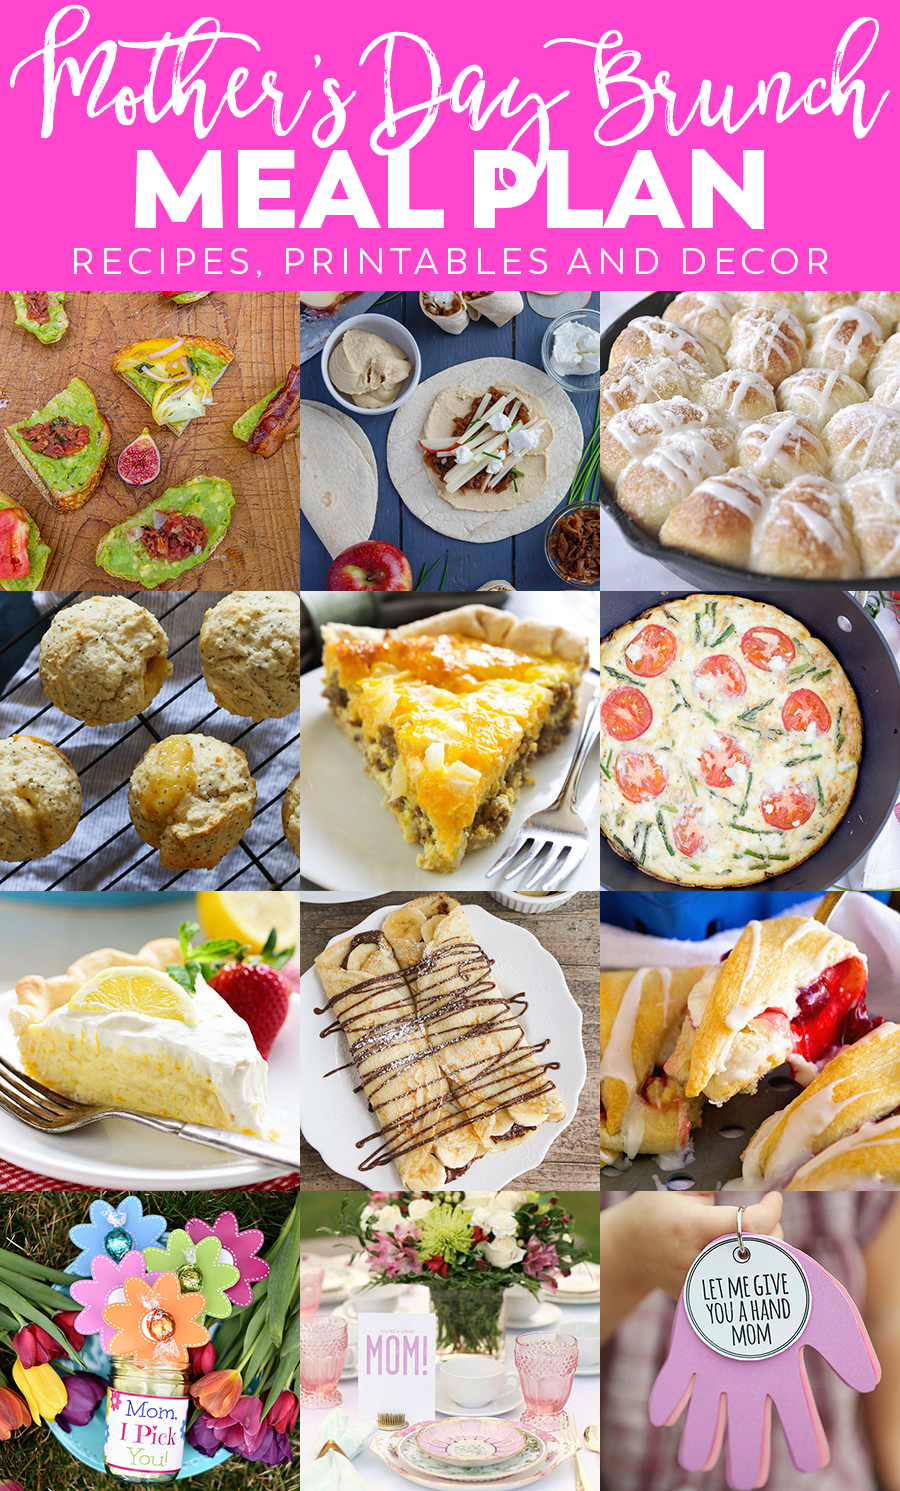 Mother's Day Brunch Meal Plan | Mother's Day Recipes, Printables and Decor